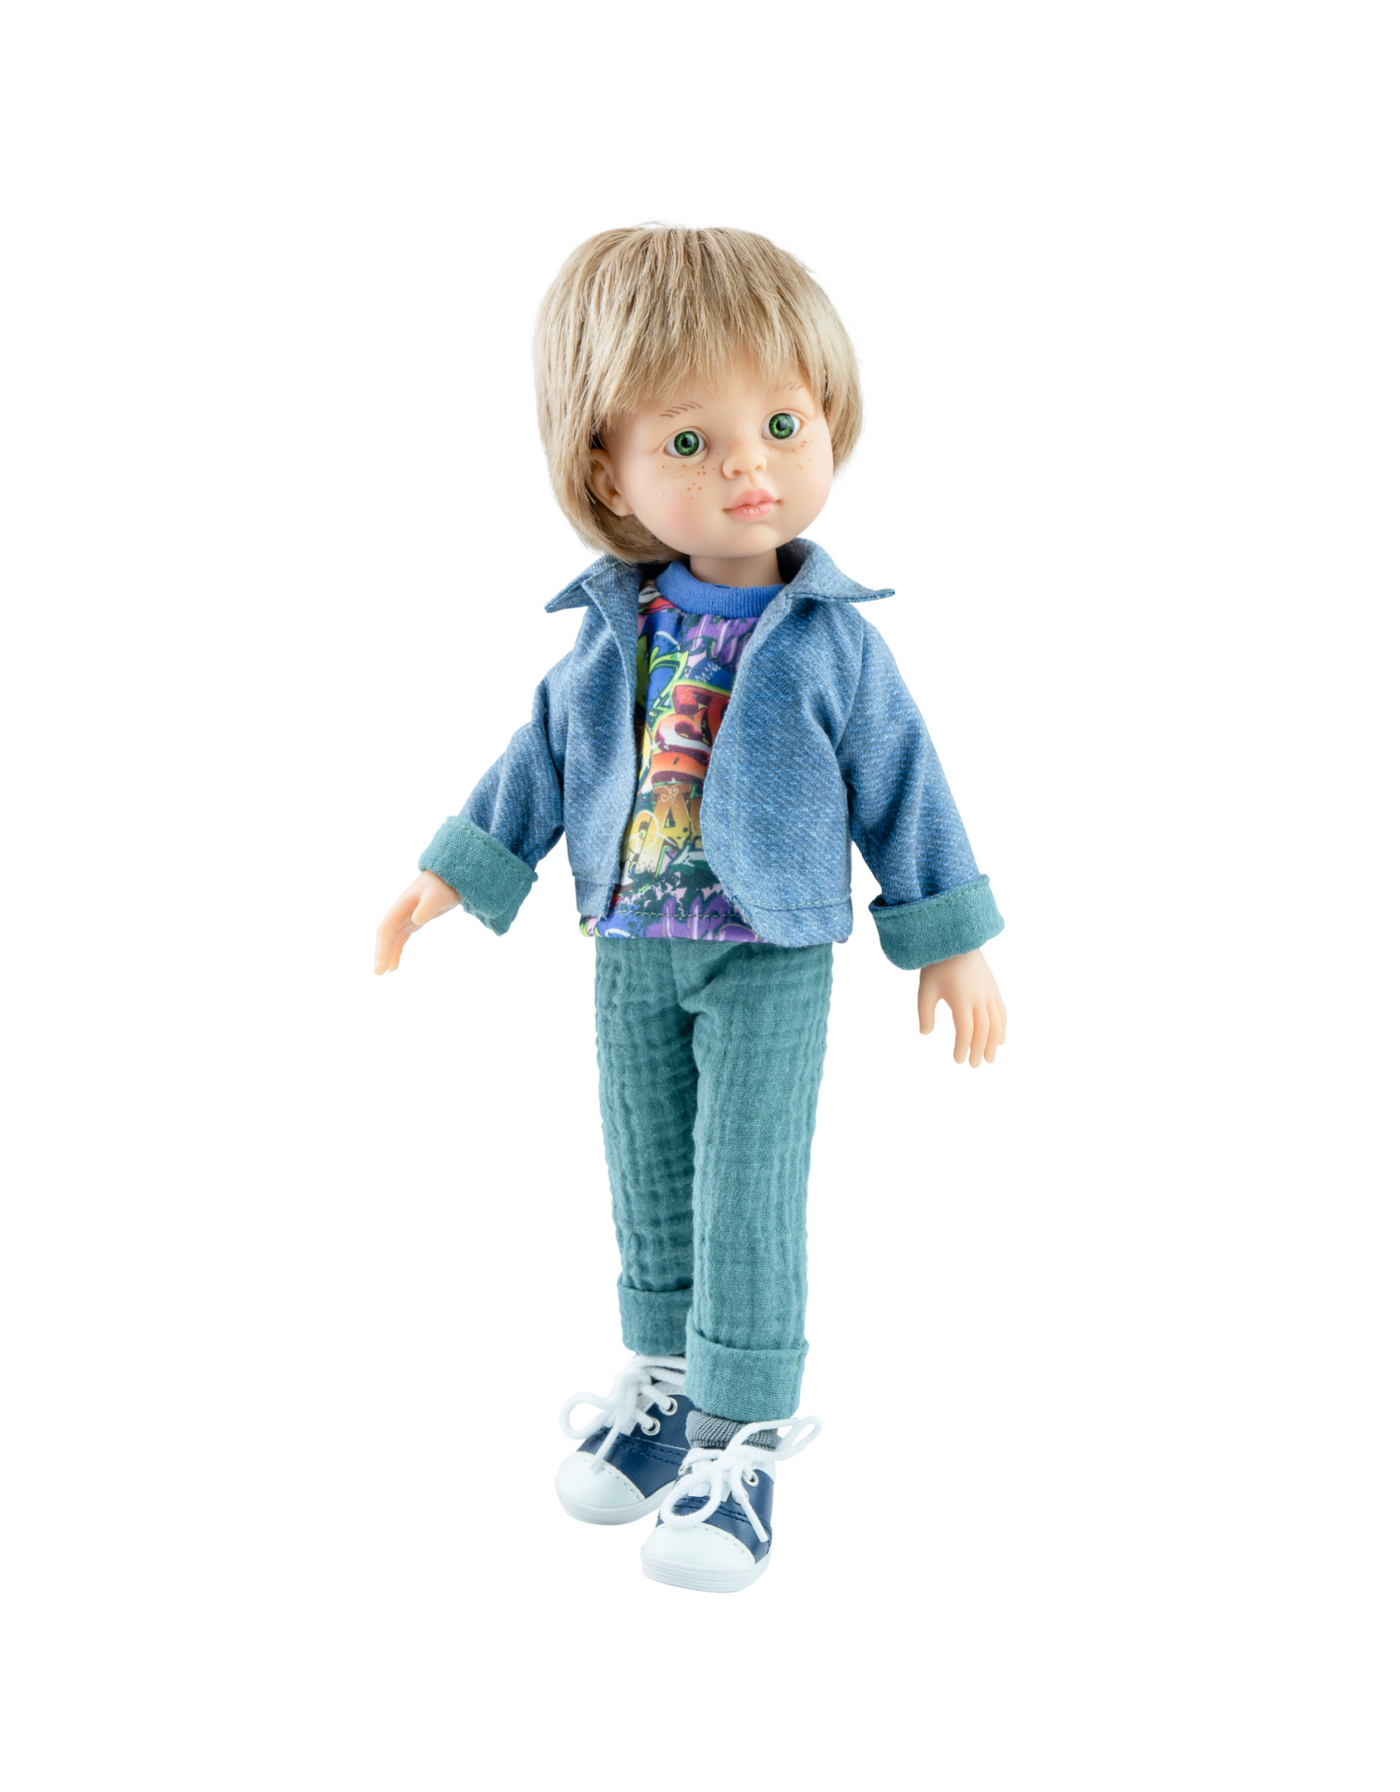 Las Amigas Doll - Luis with green linen jacket, sweater and pants - Paola Reina